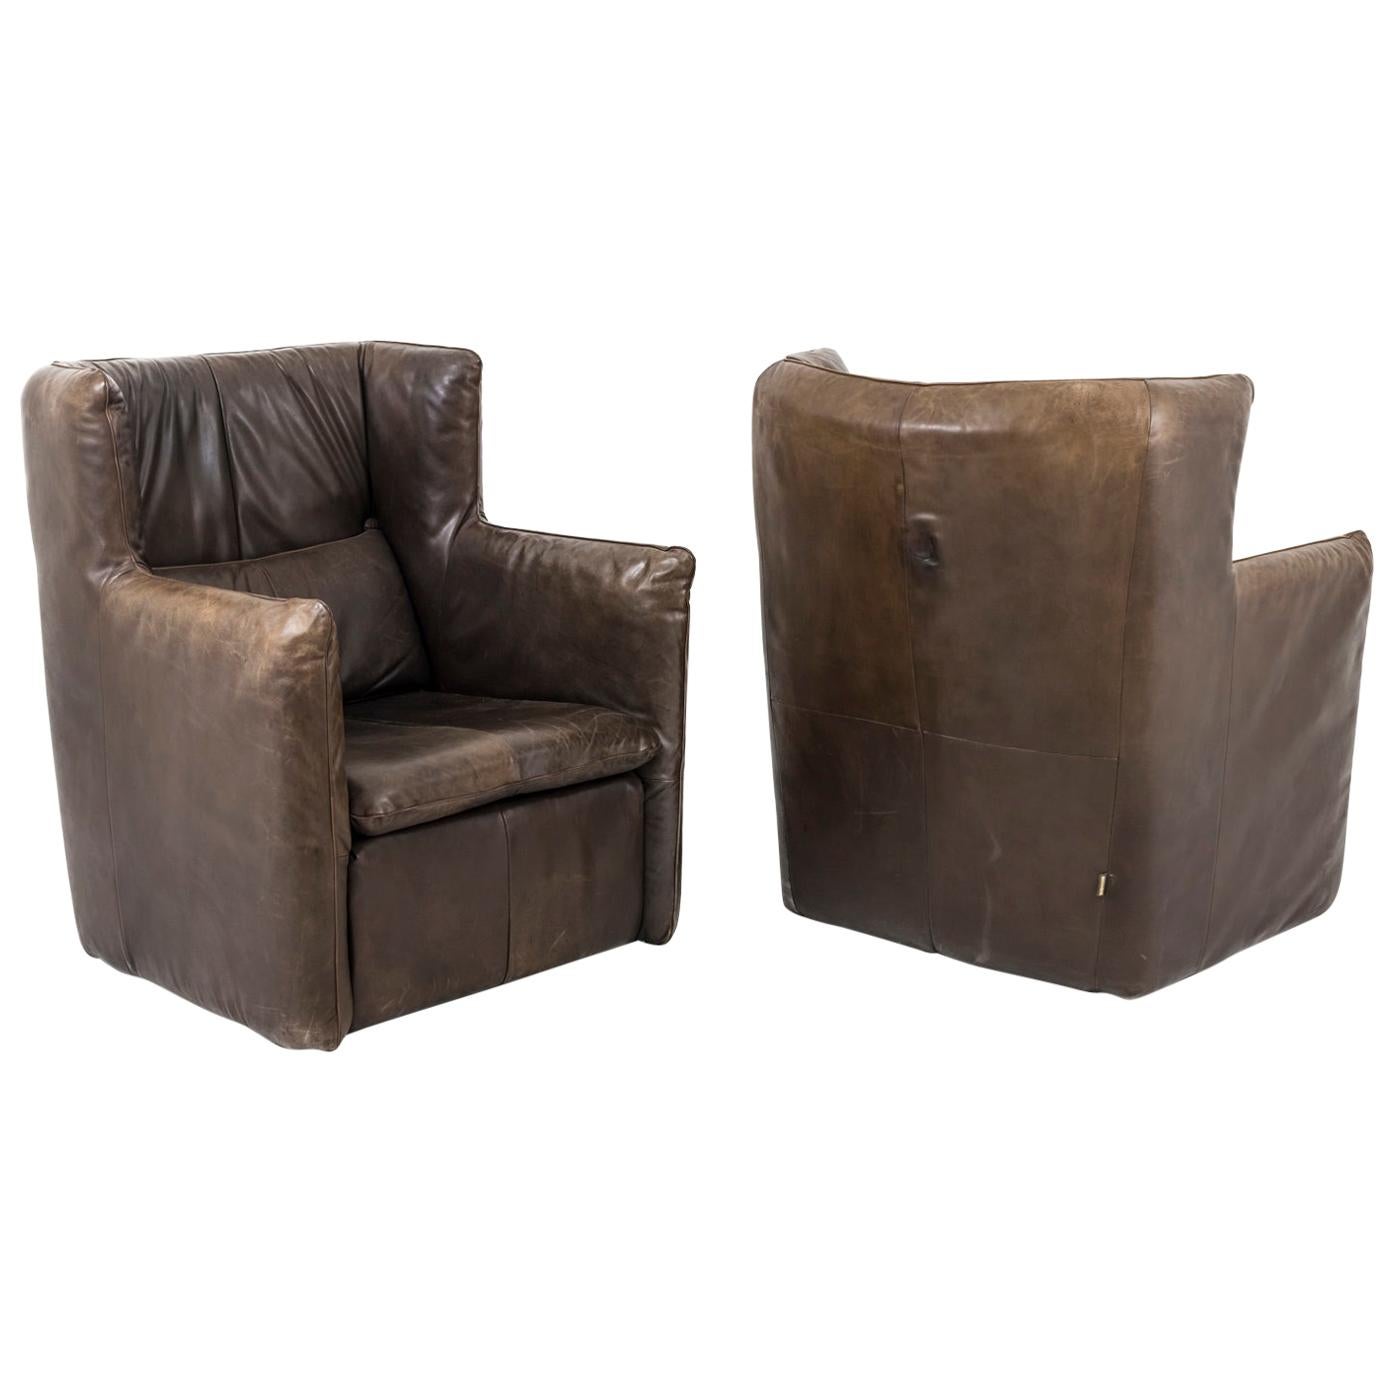 Van Den Berg for Montis, Pair of Armchairs in Brown Leather, `after 1974